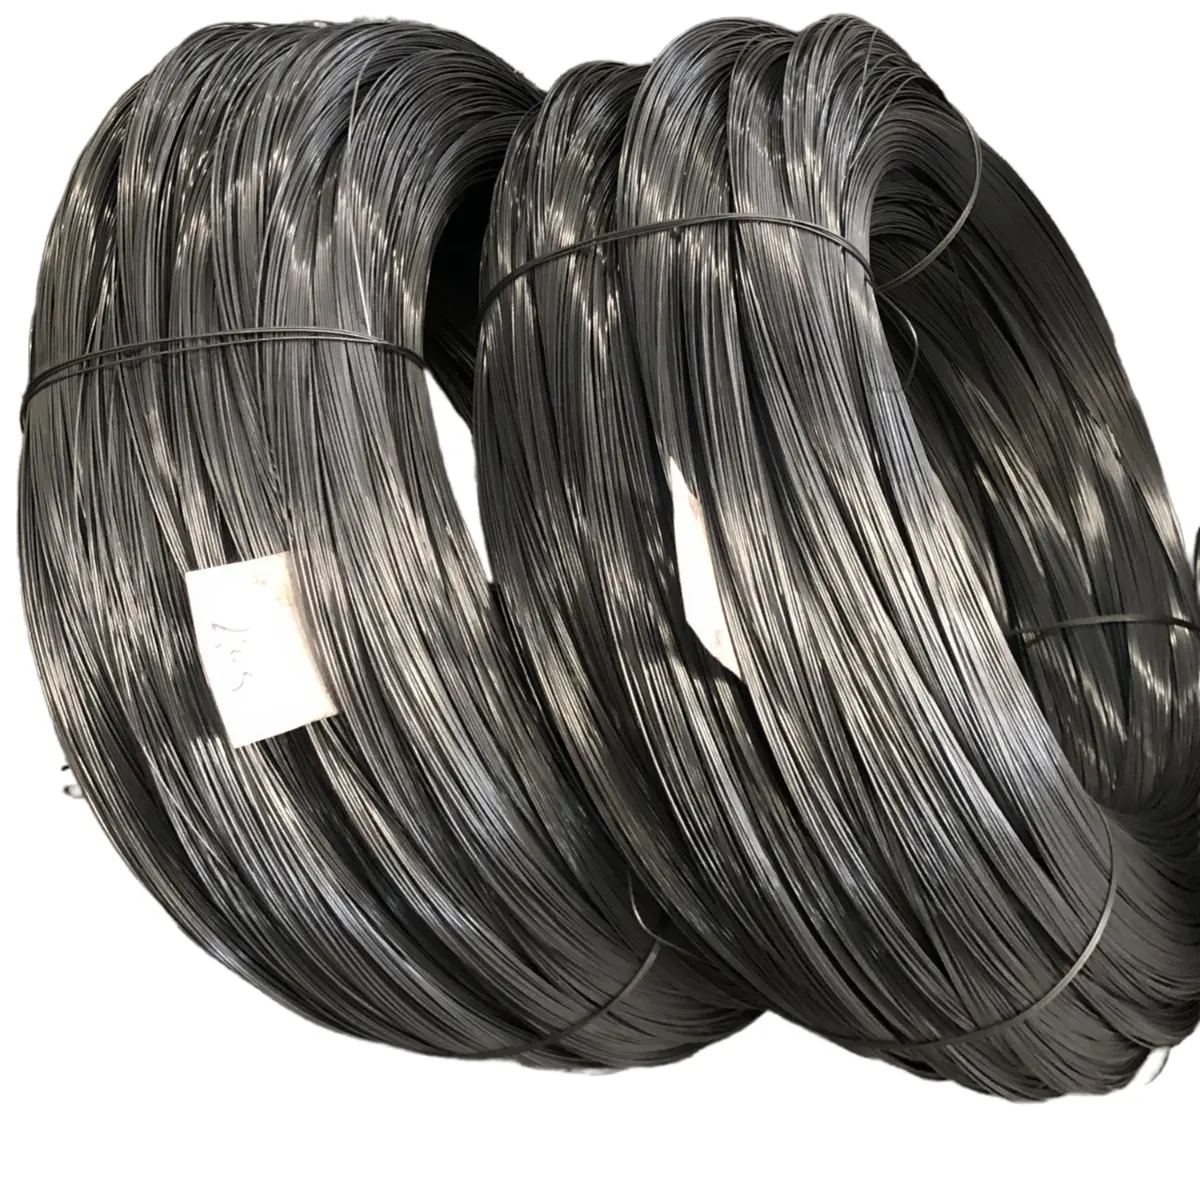 Spring steel wire galvanized cold drawing phosphated aluminum wire annealing binding welding wire for flexible shaft